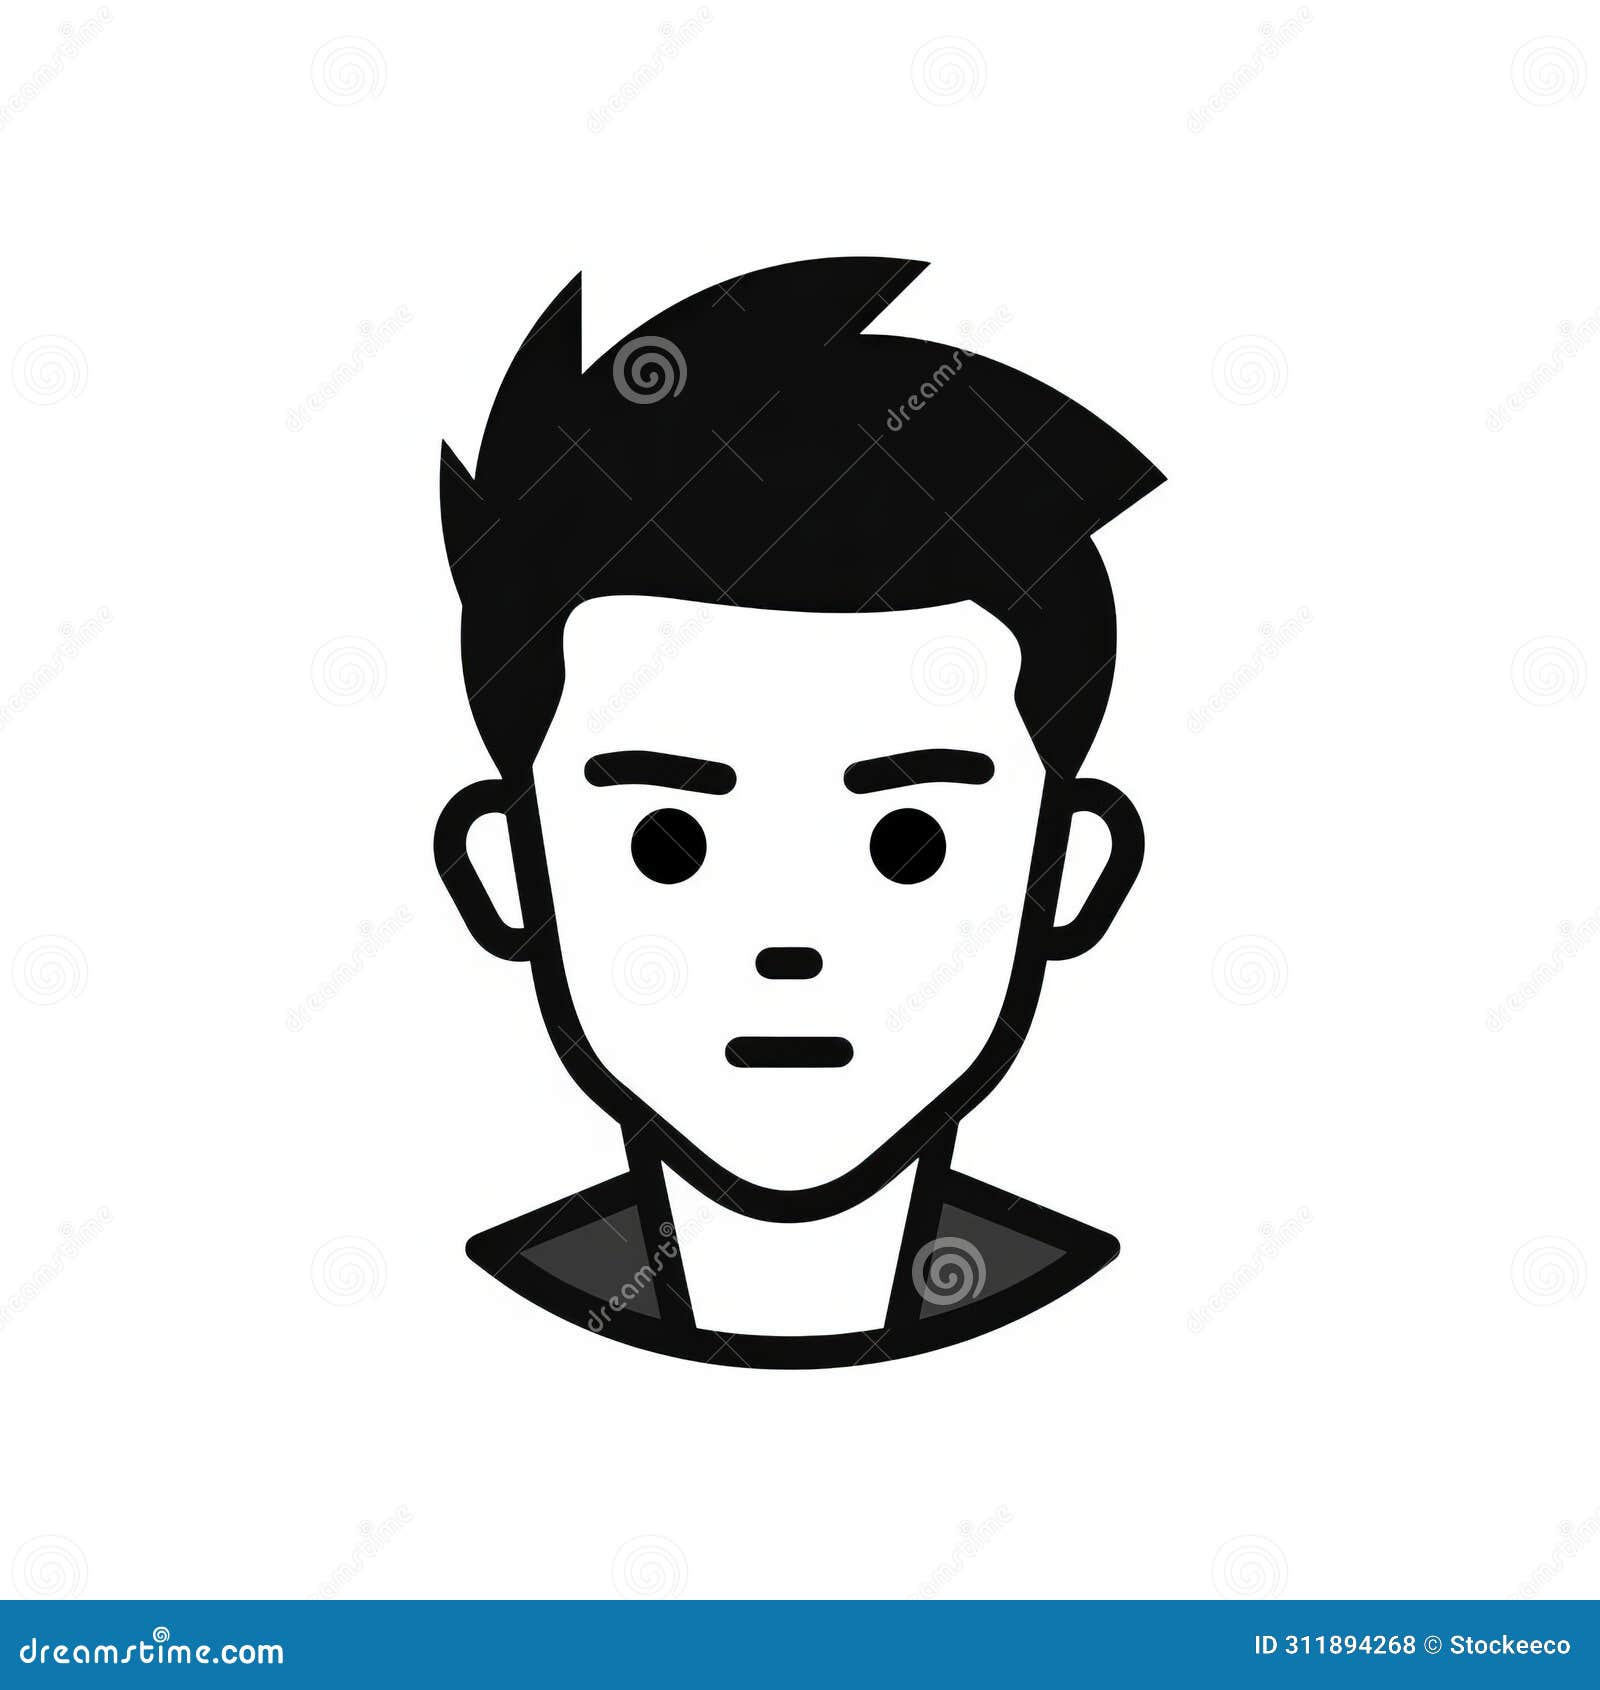 cute cartoonish man icon with short hair in black and white